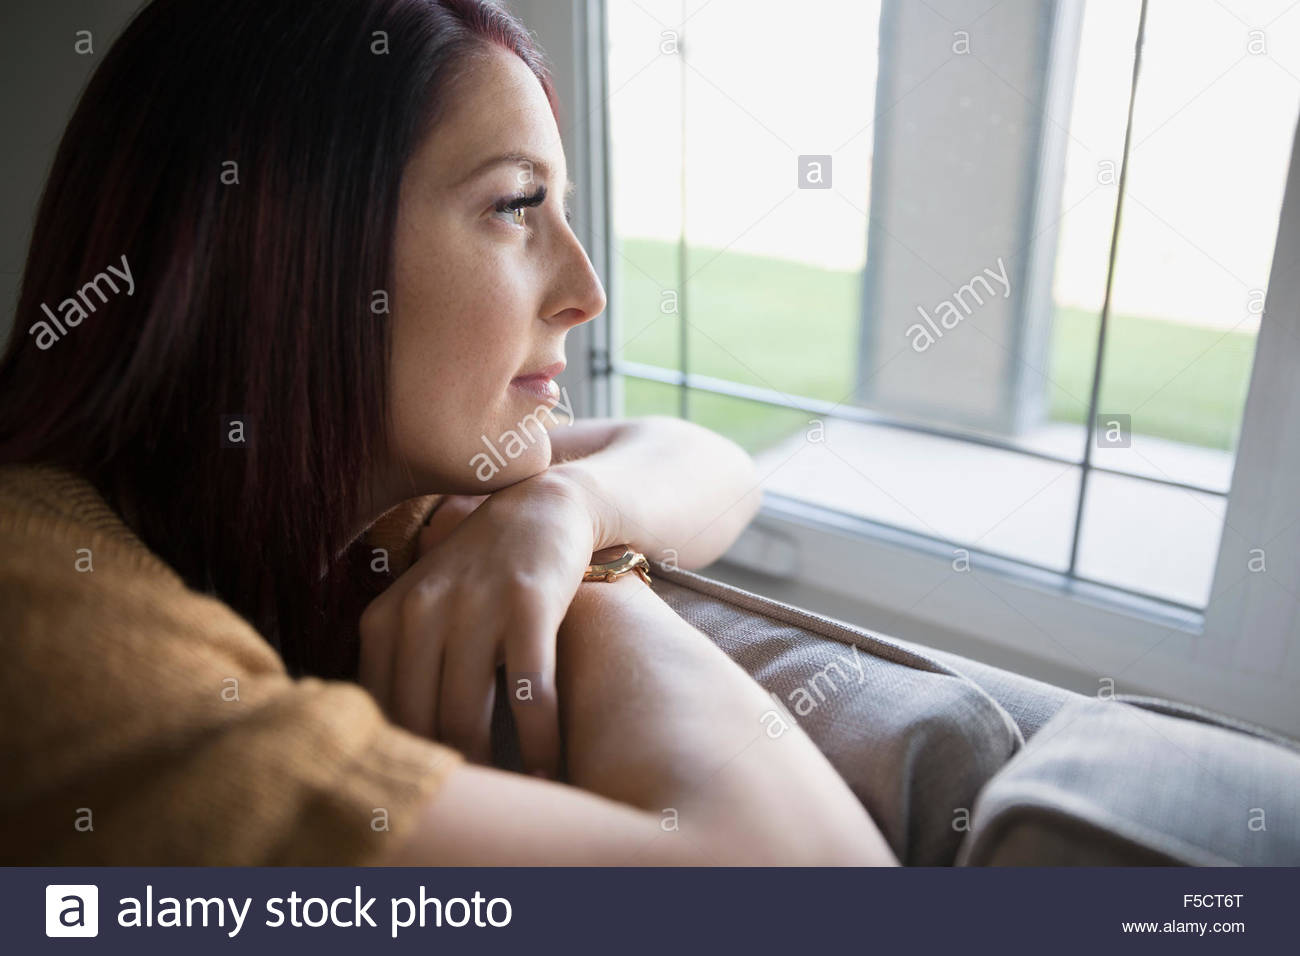 Pensive woman on sofa looking out window Stock Photo